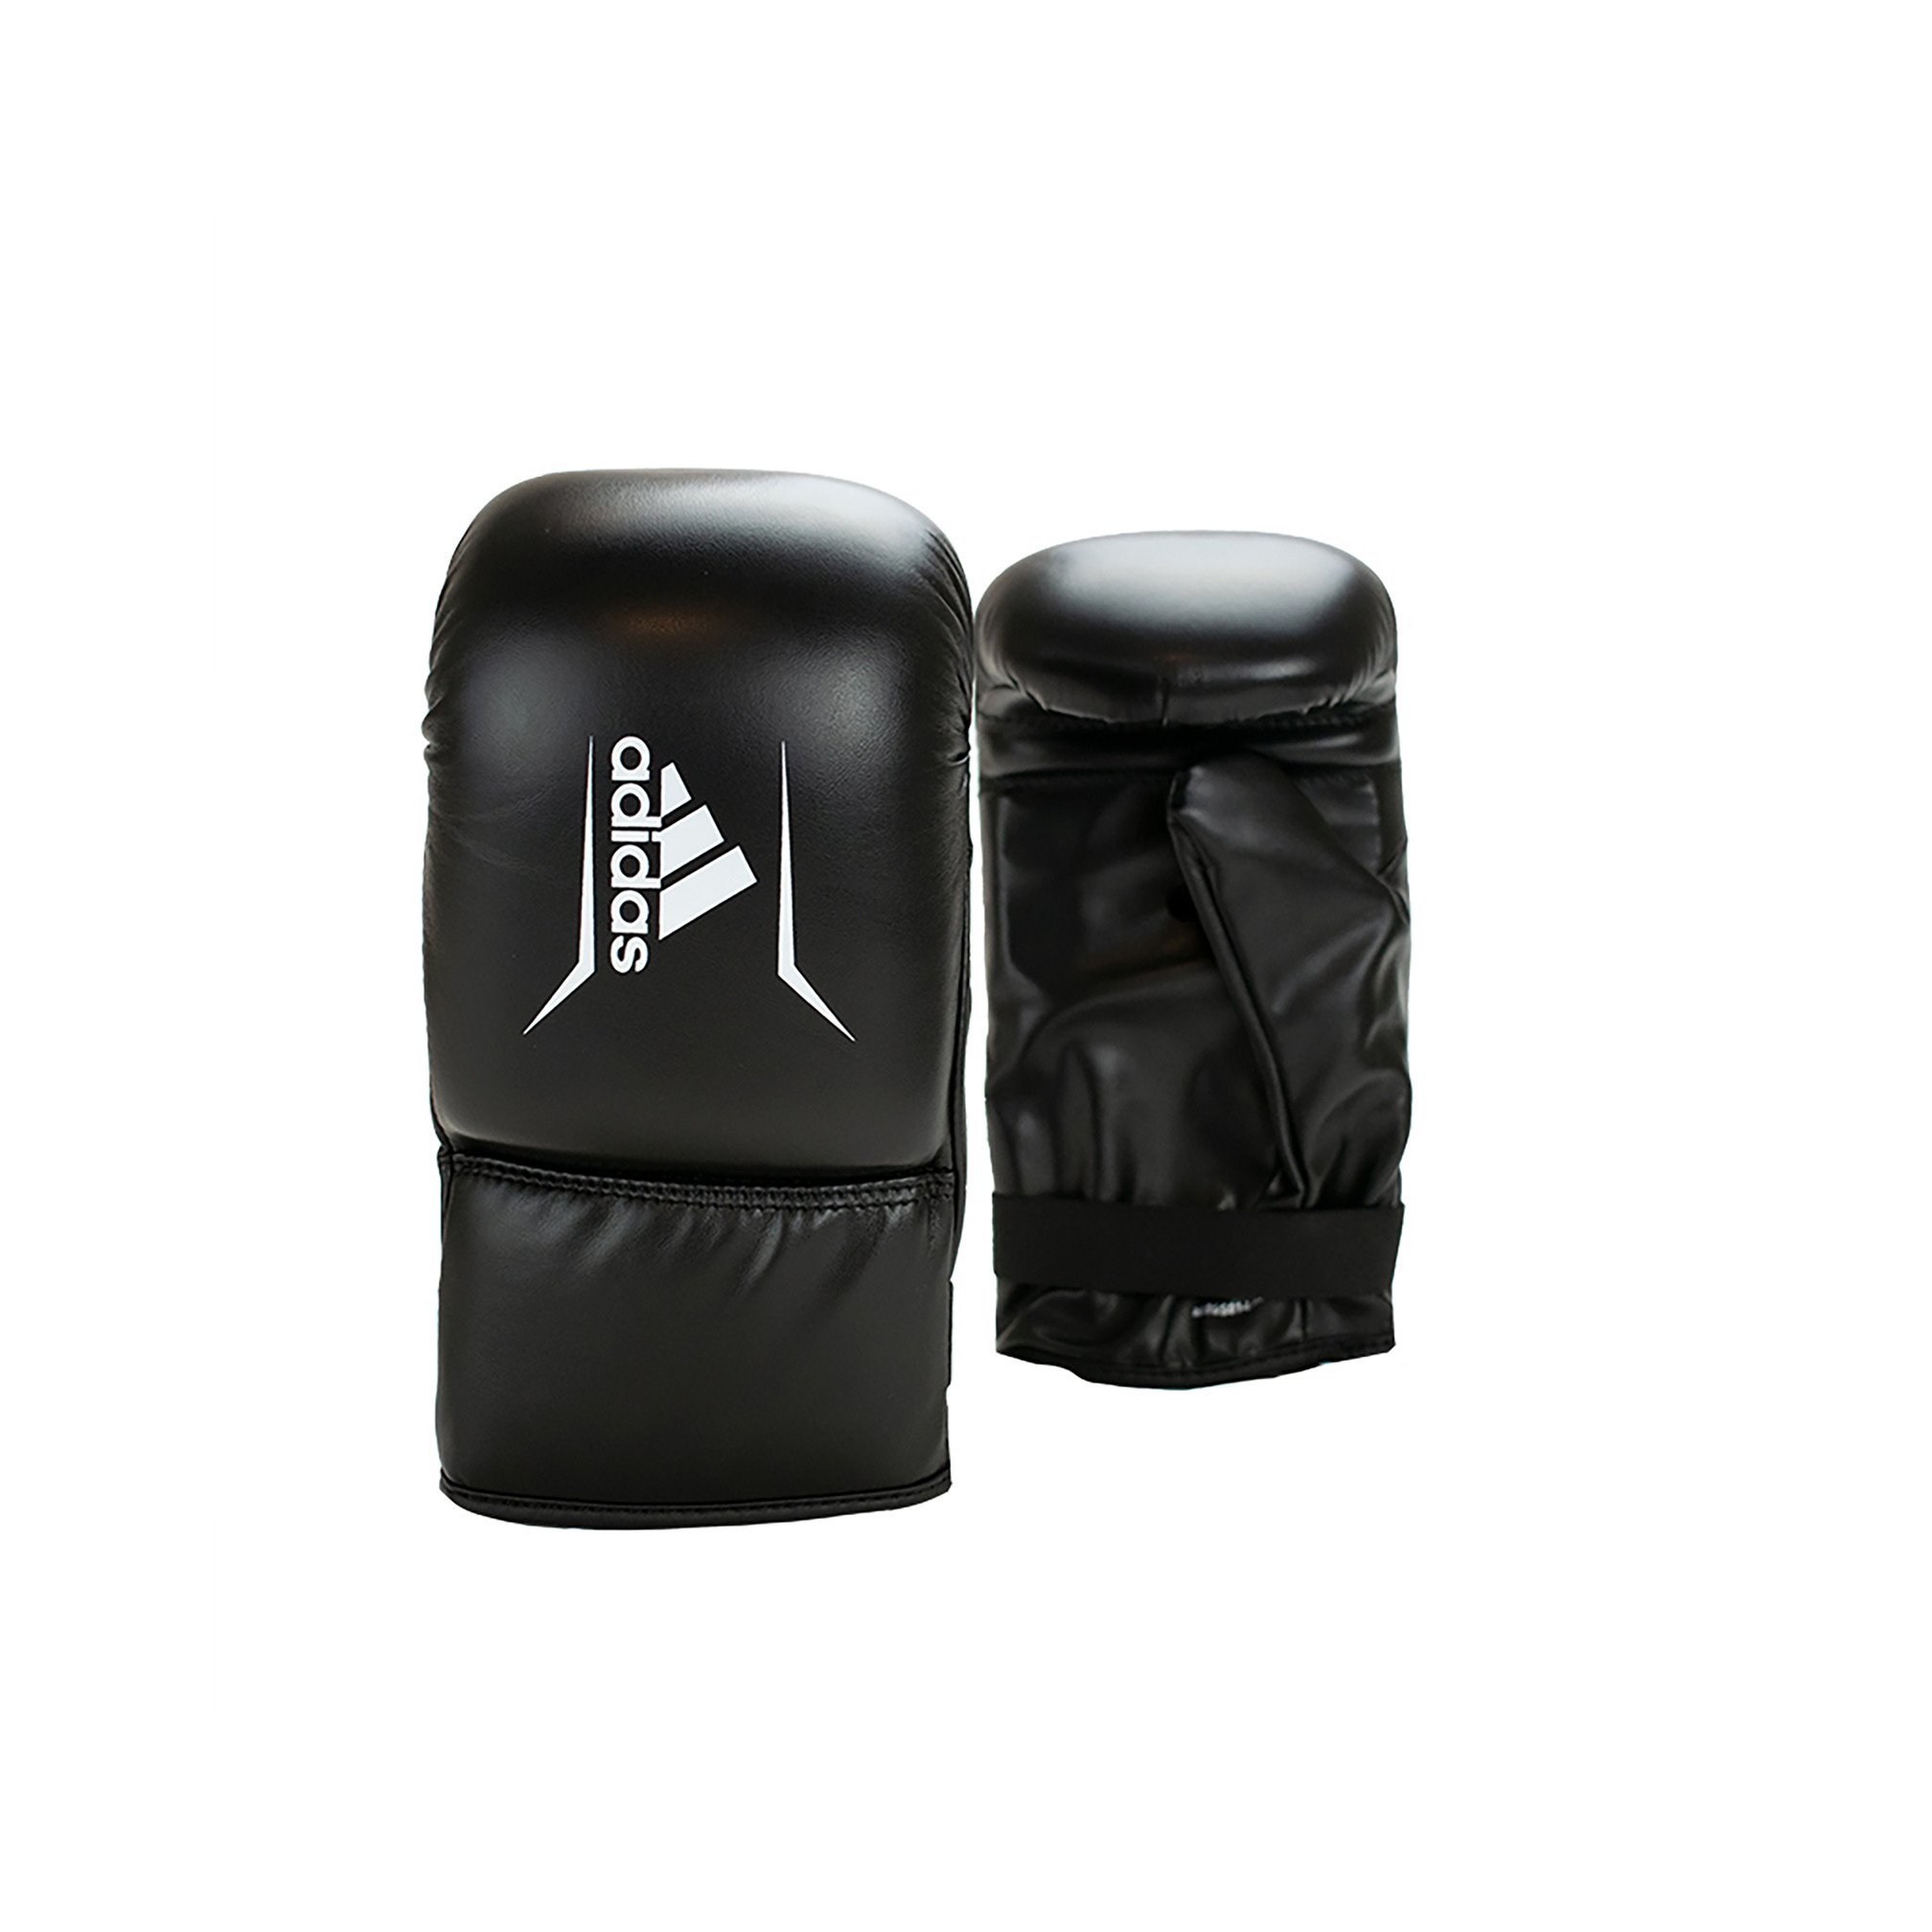 Adidas response gloves for boxing bags